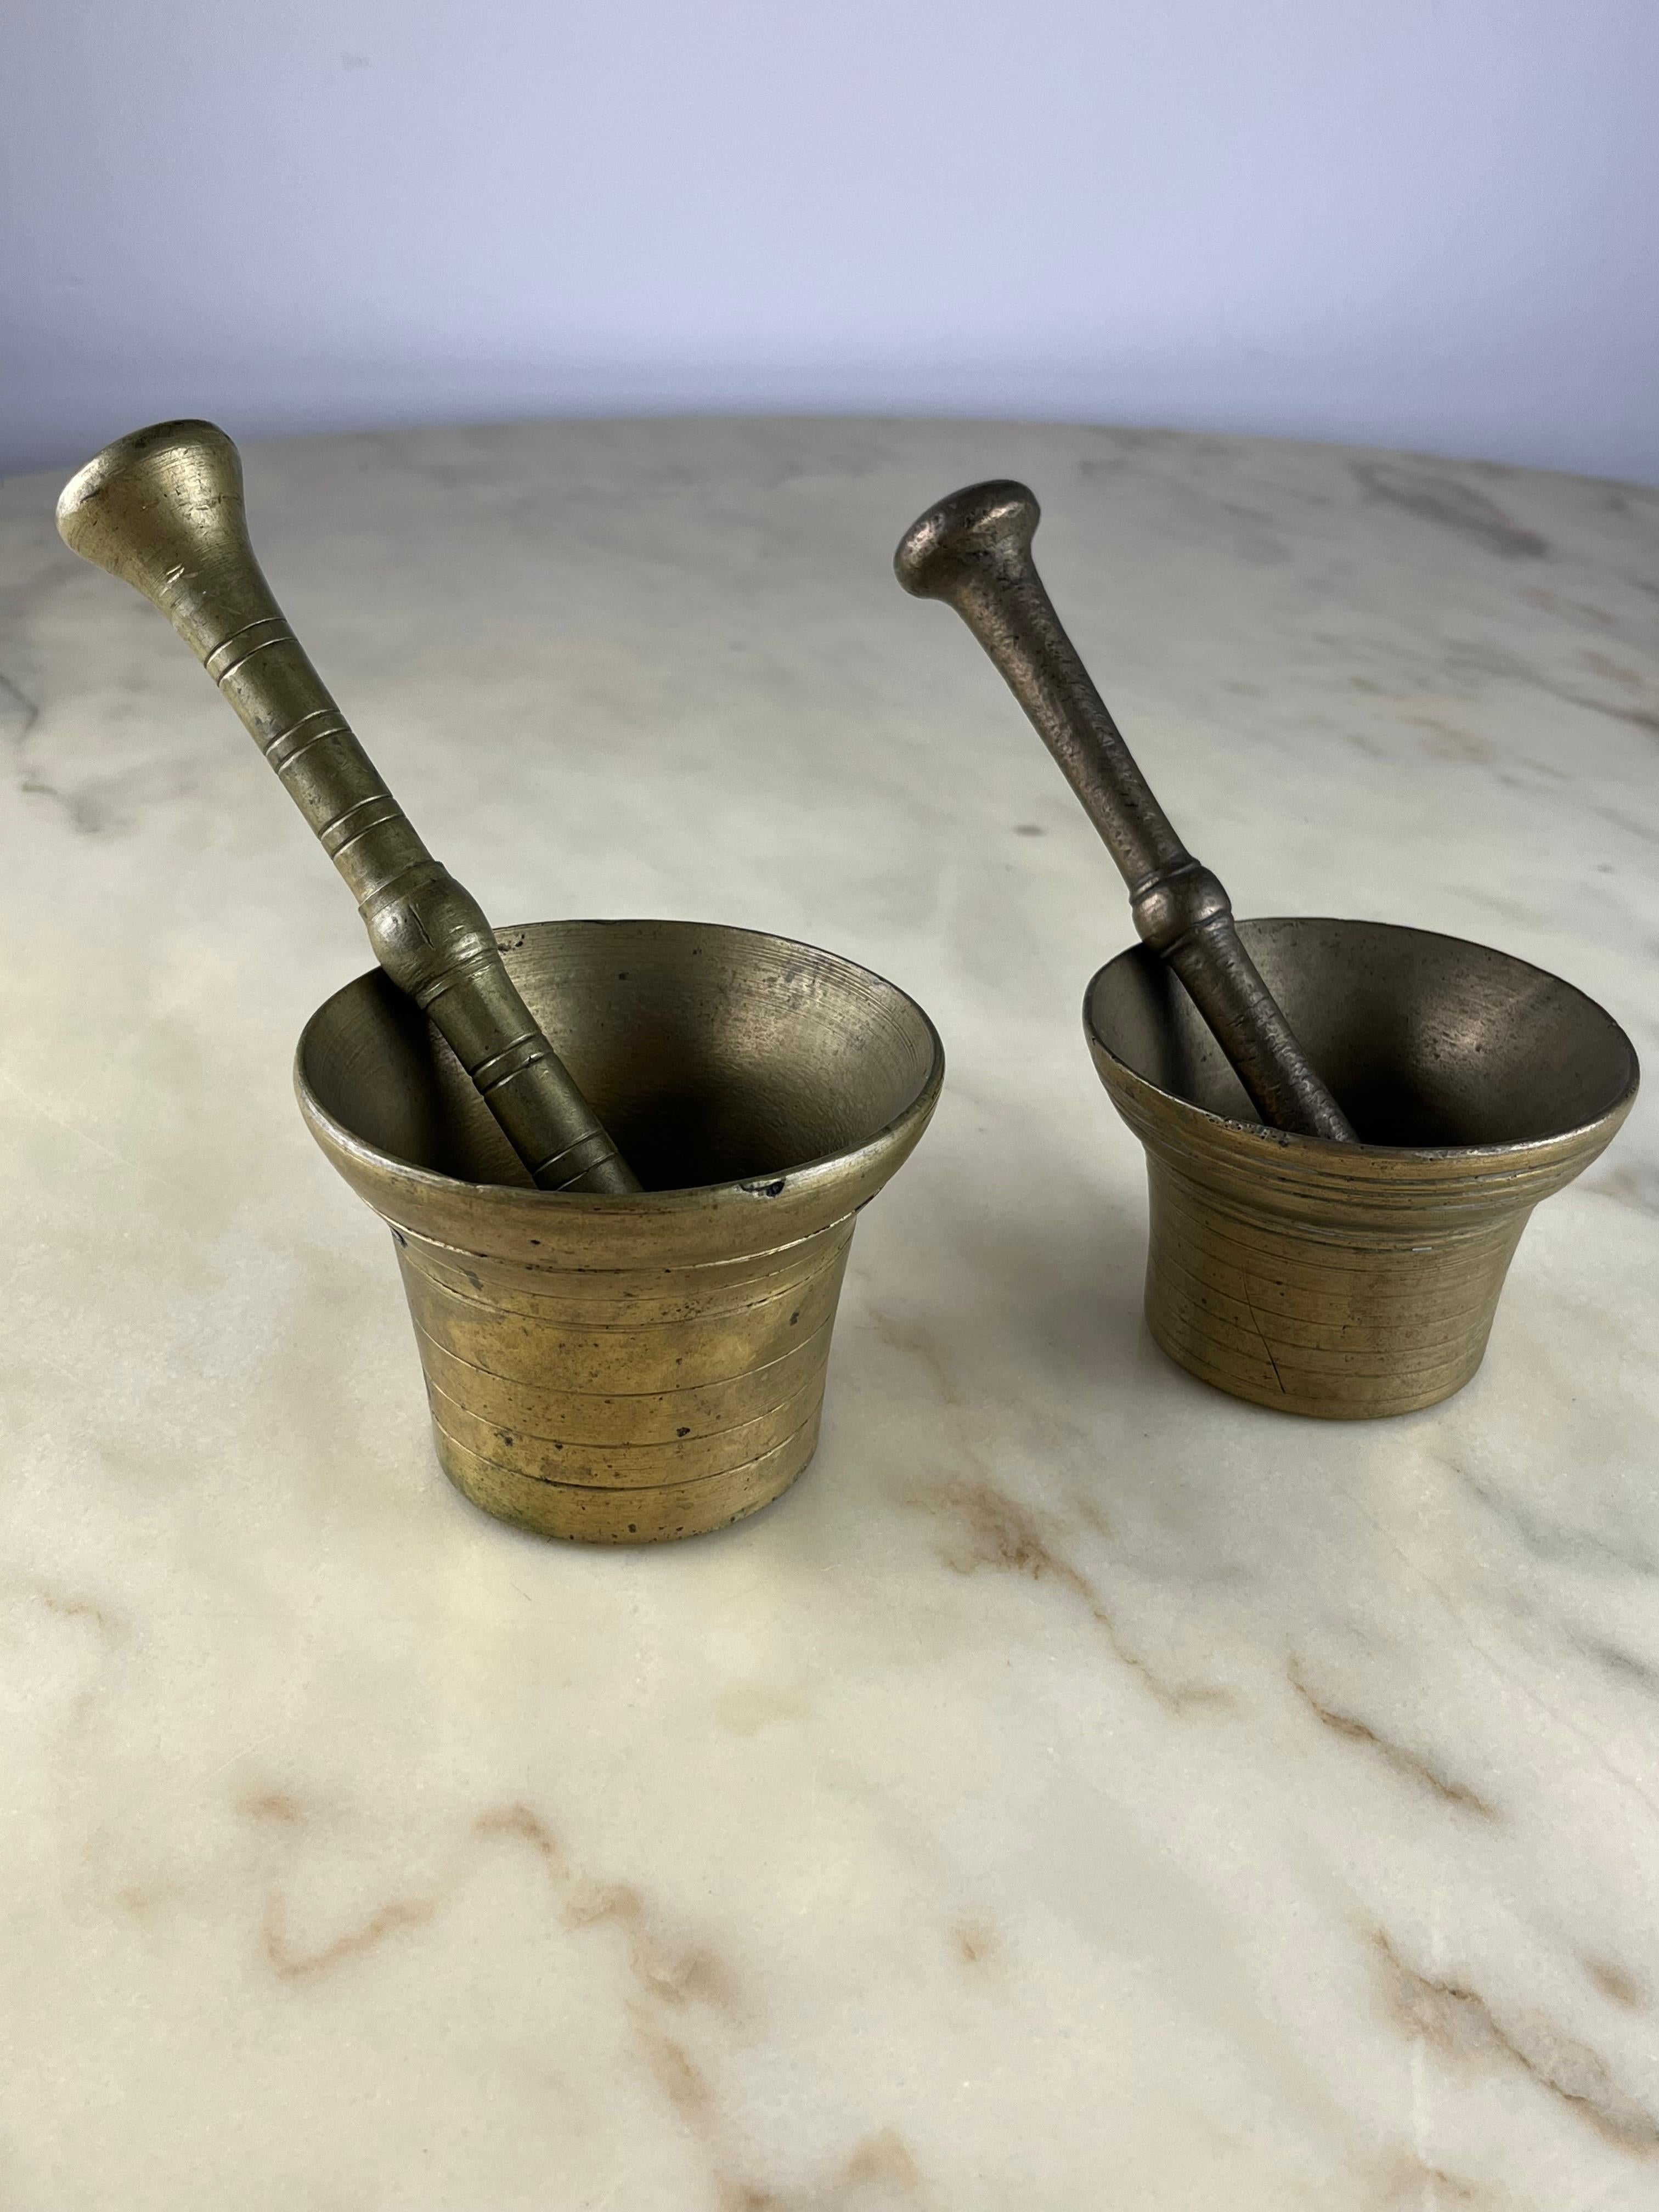 Two mortars with pestles, brass, Genoese 